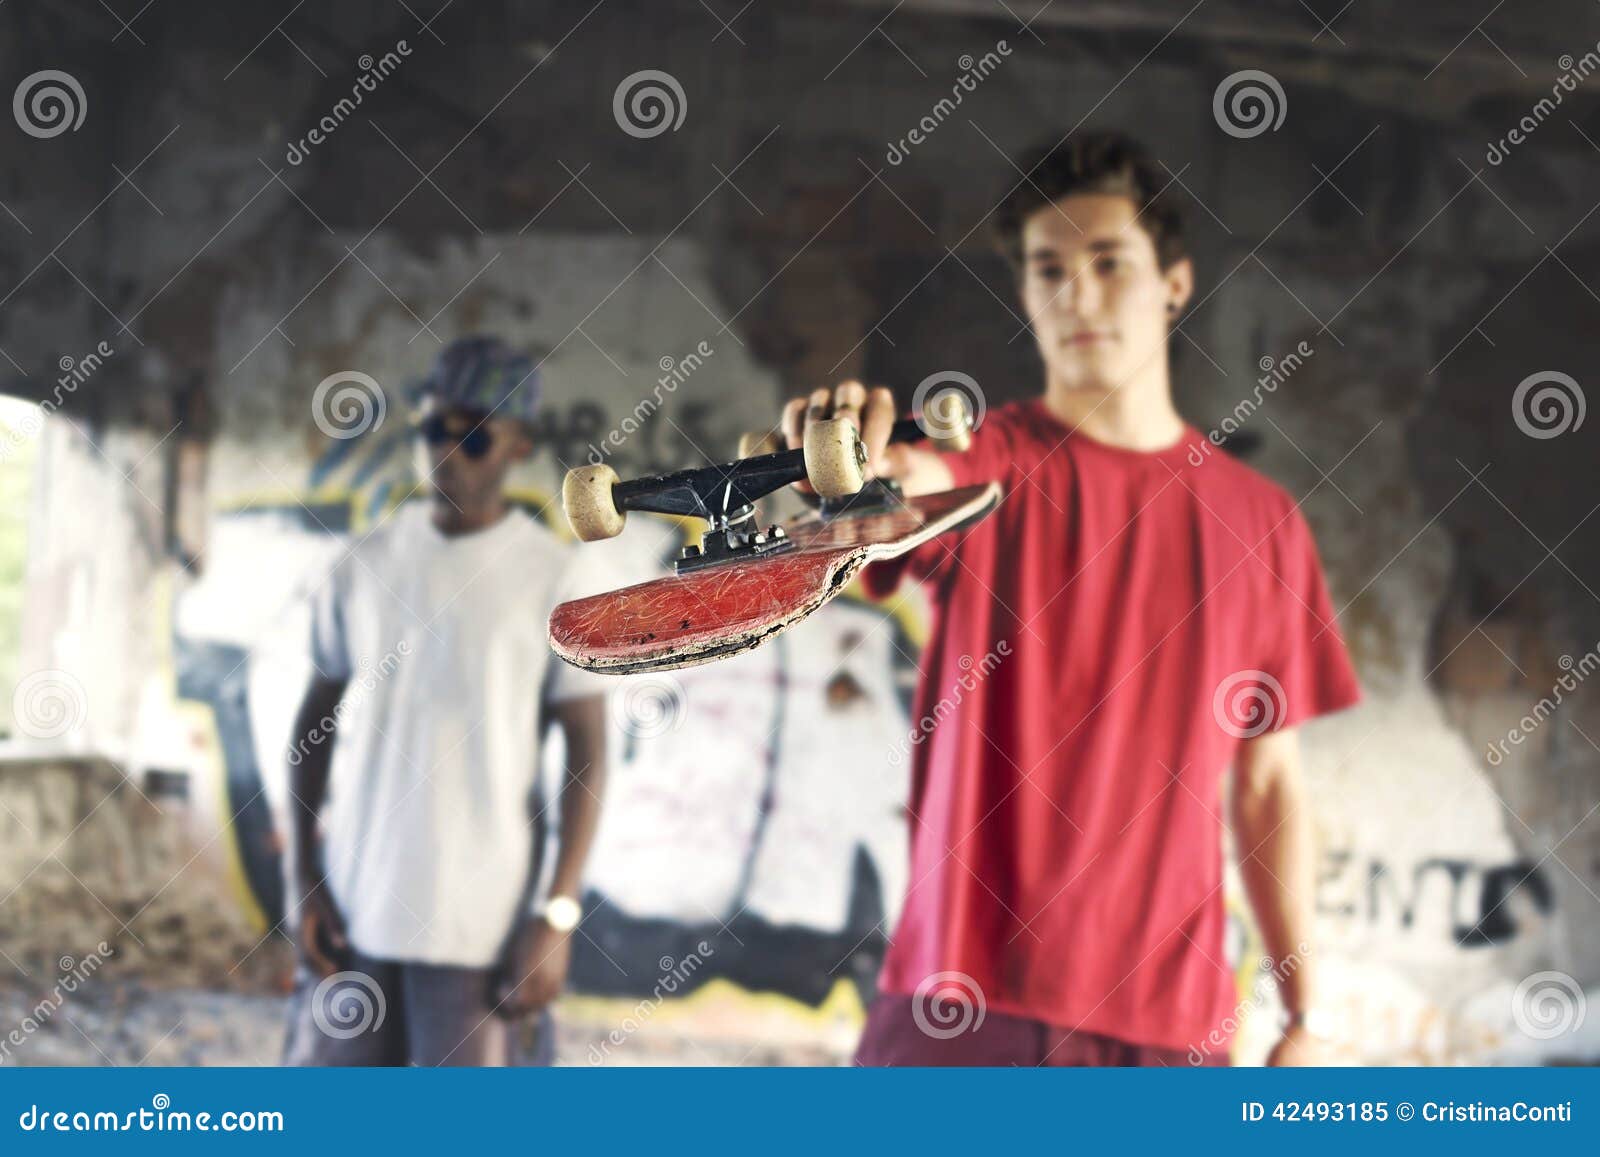 skater giving you his skate for a challenge